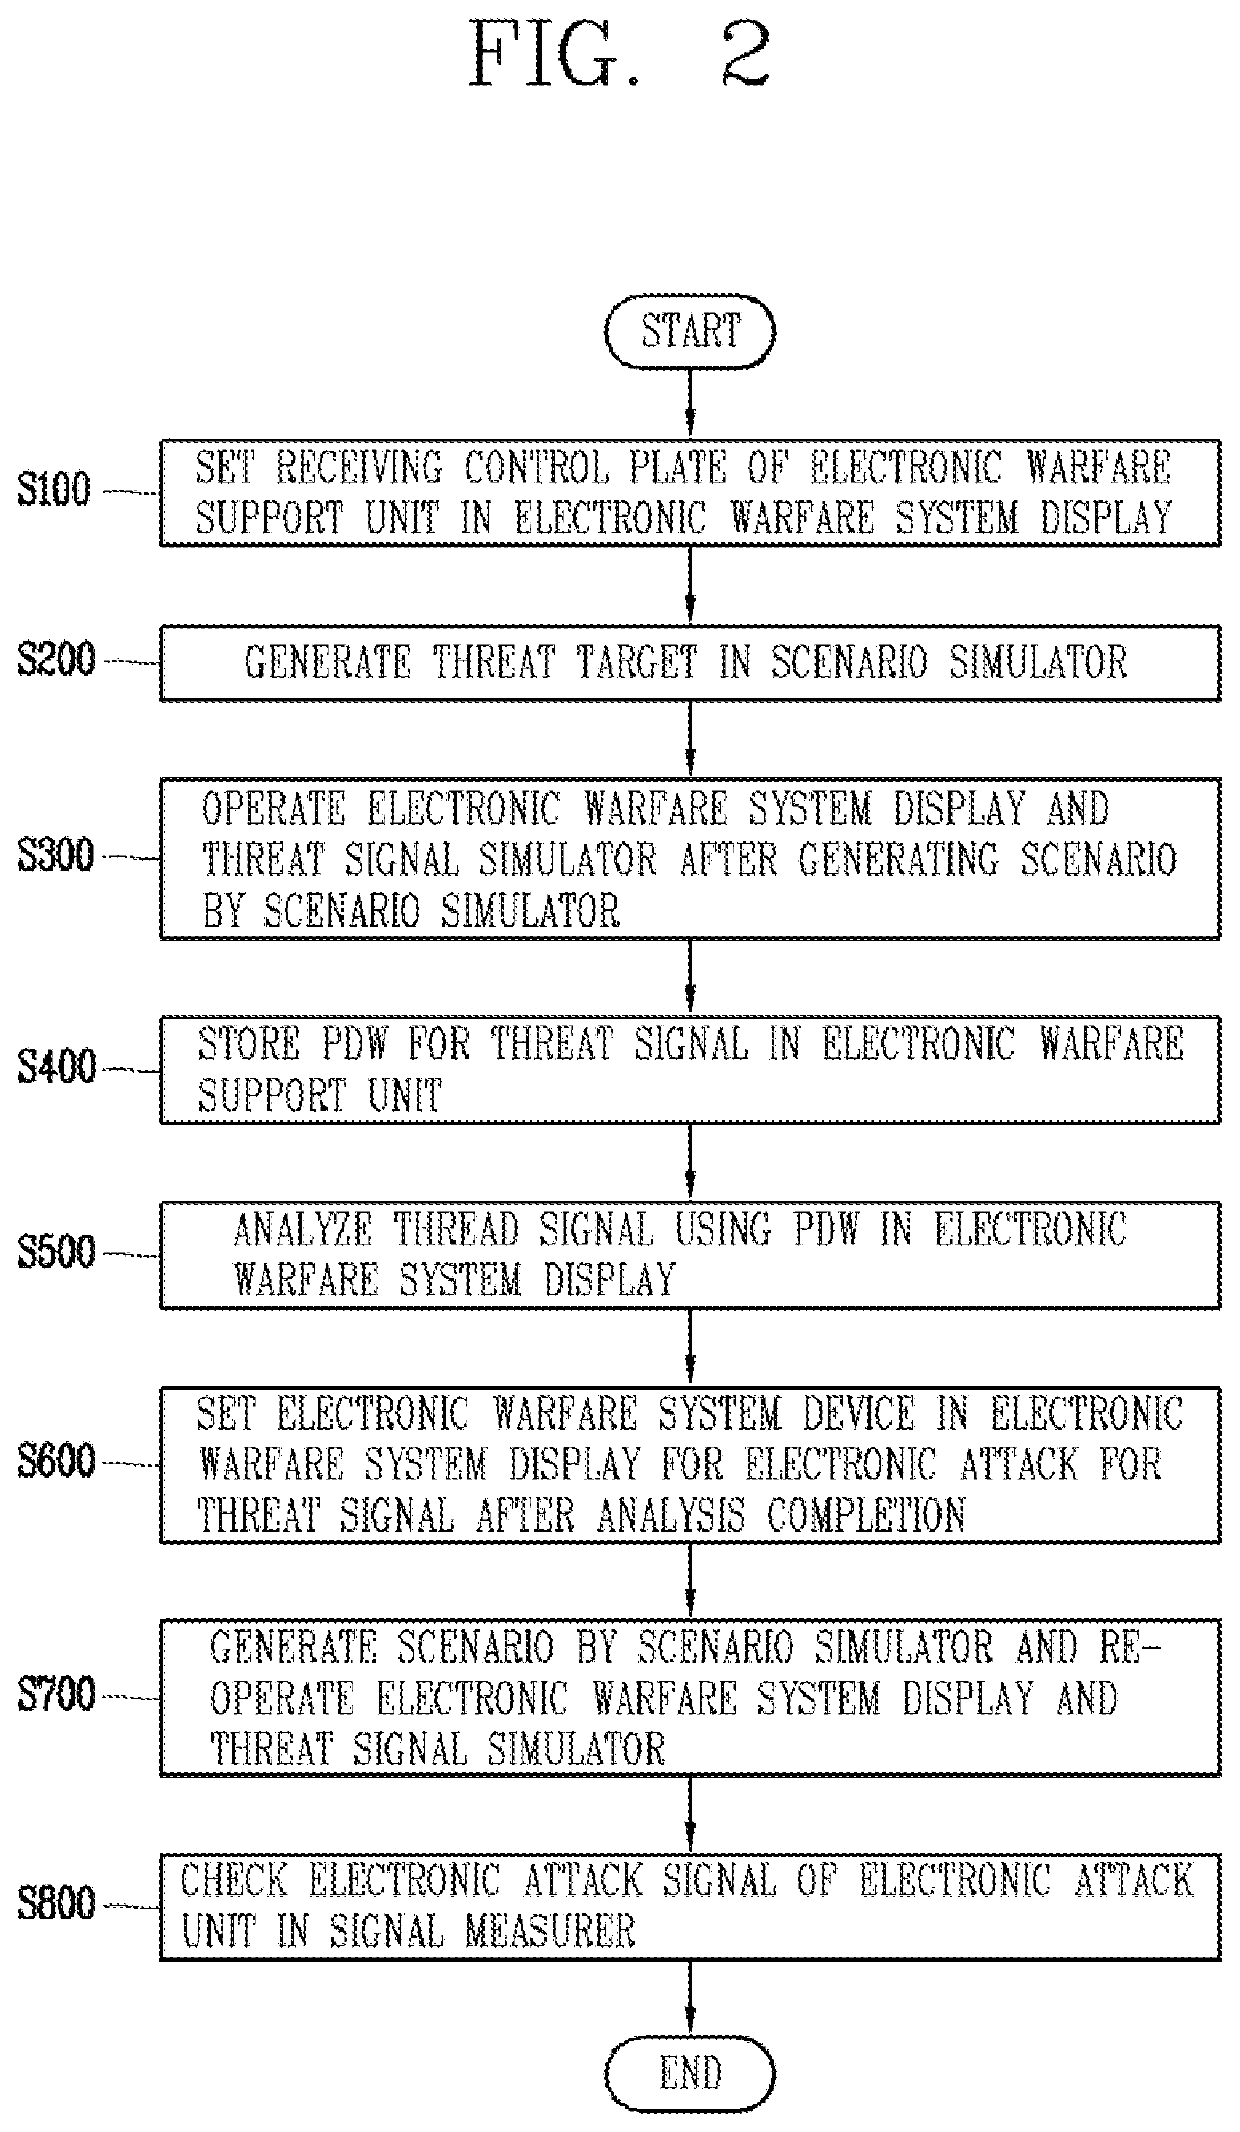 Electronic warfare system device with non-real-time threat signal analysis and electronic attack function